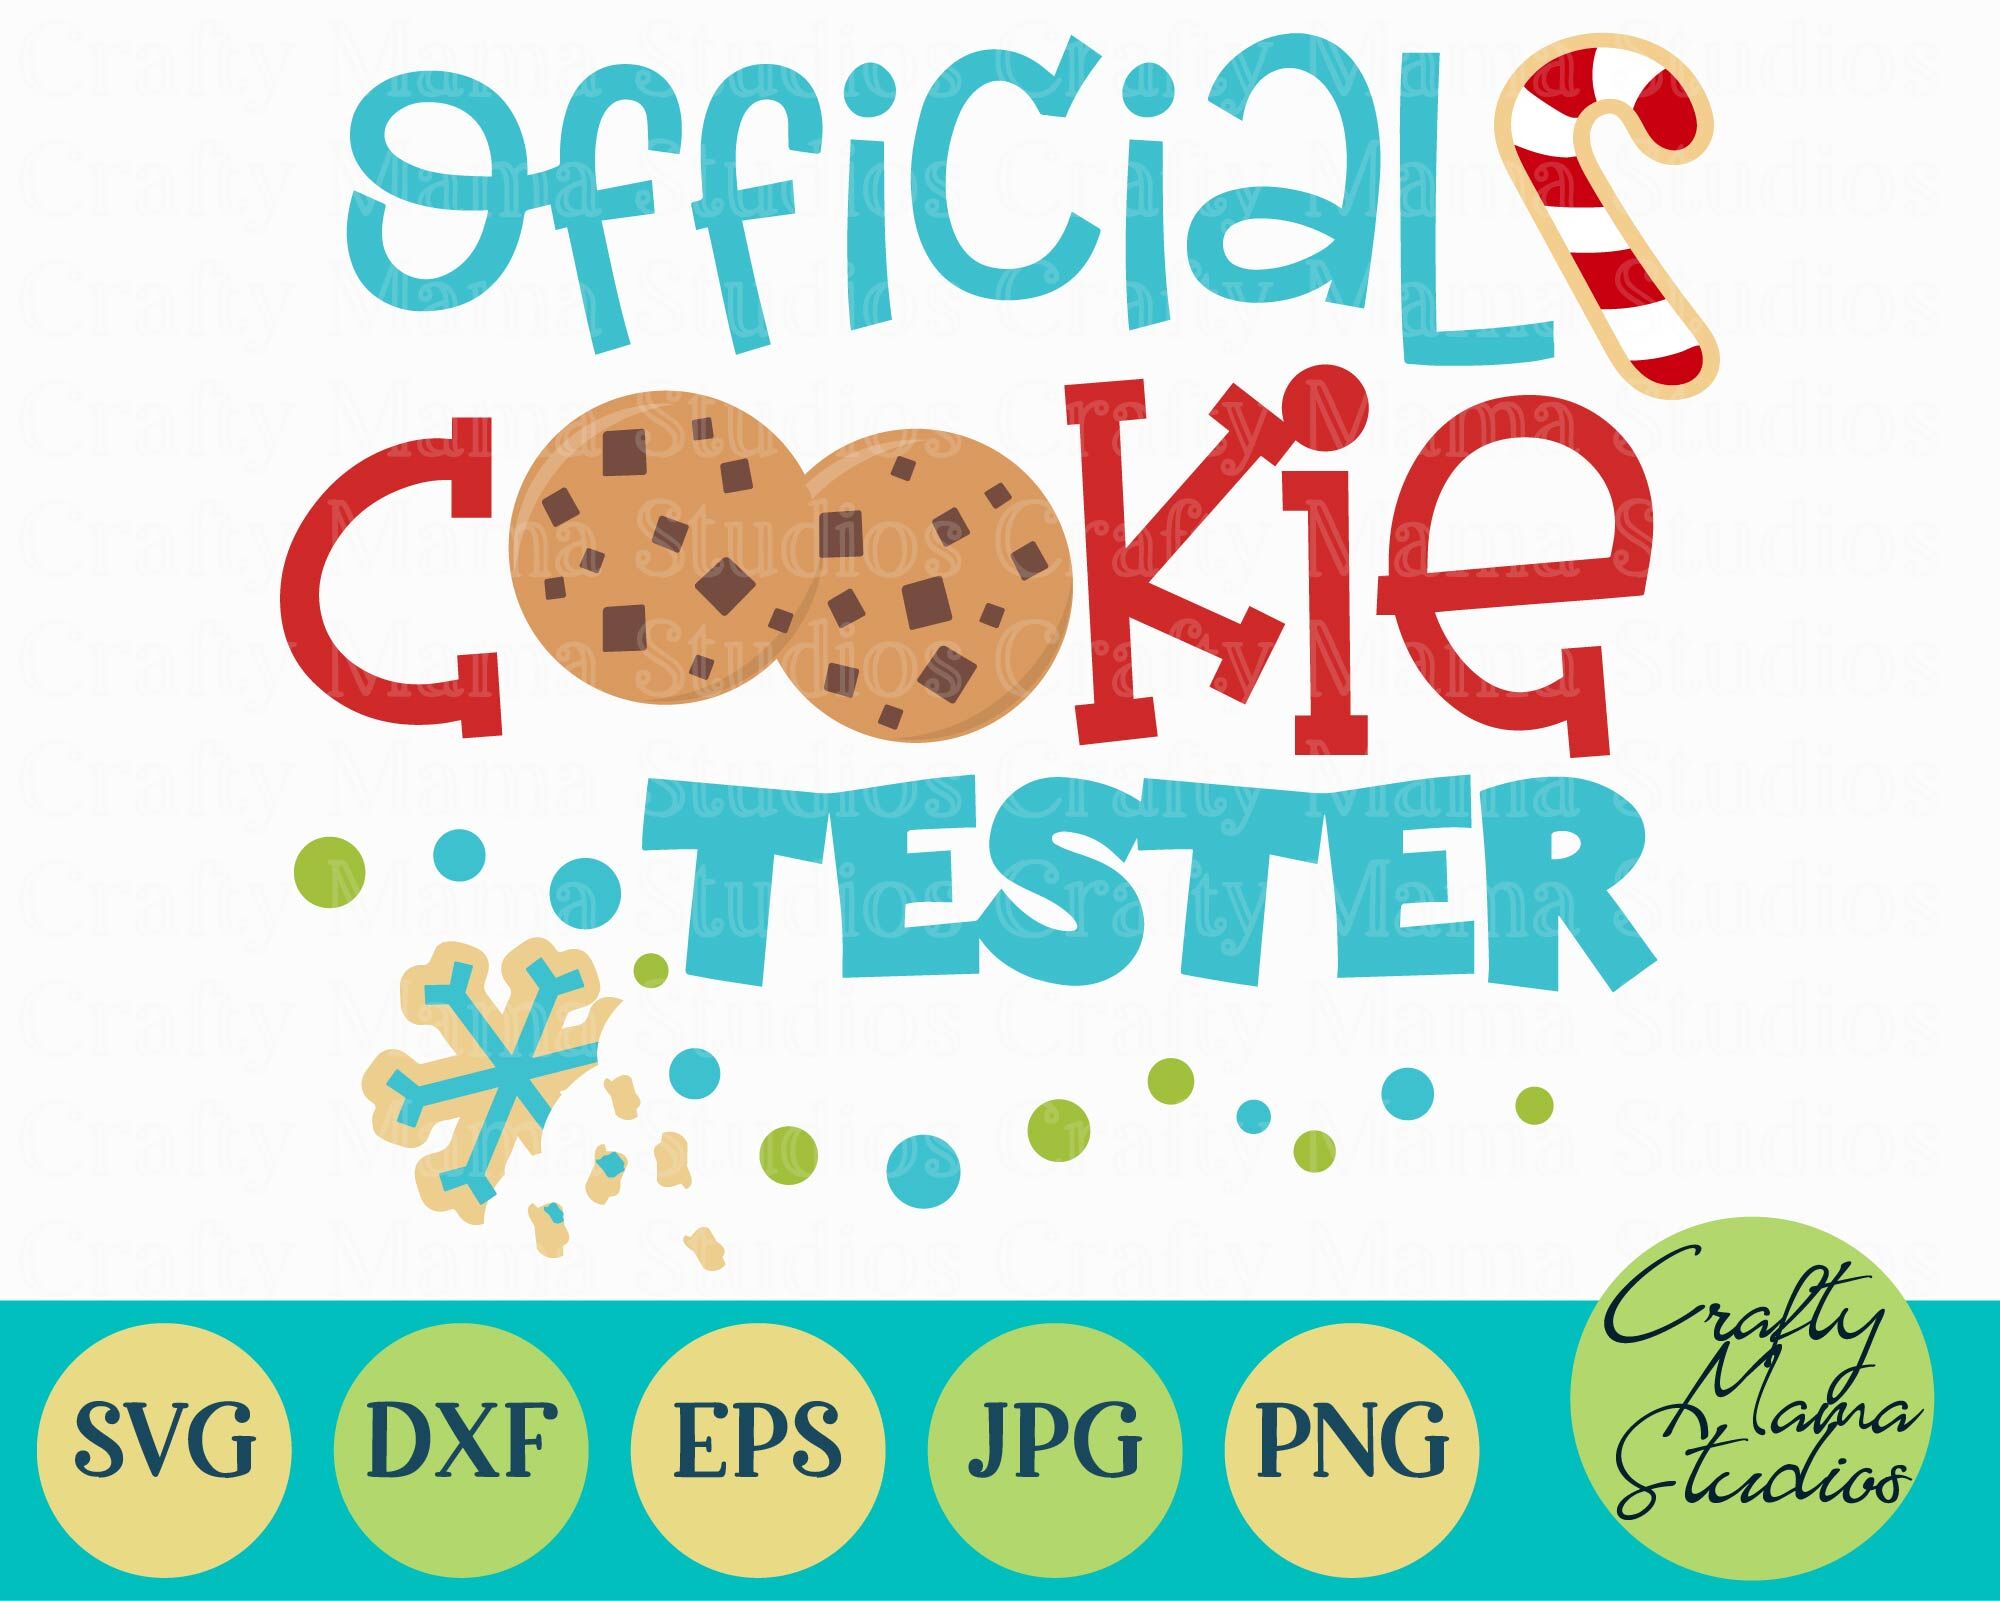 Download Free Christmas Cookies Svg PSD Mockup Template